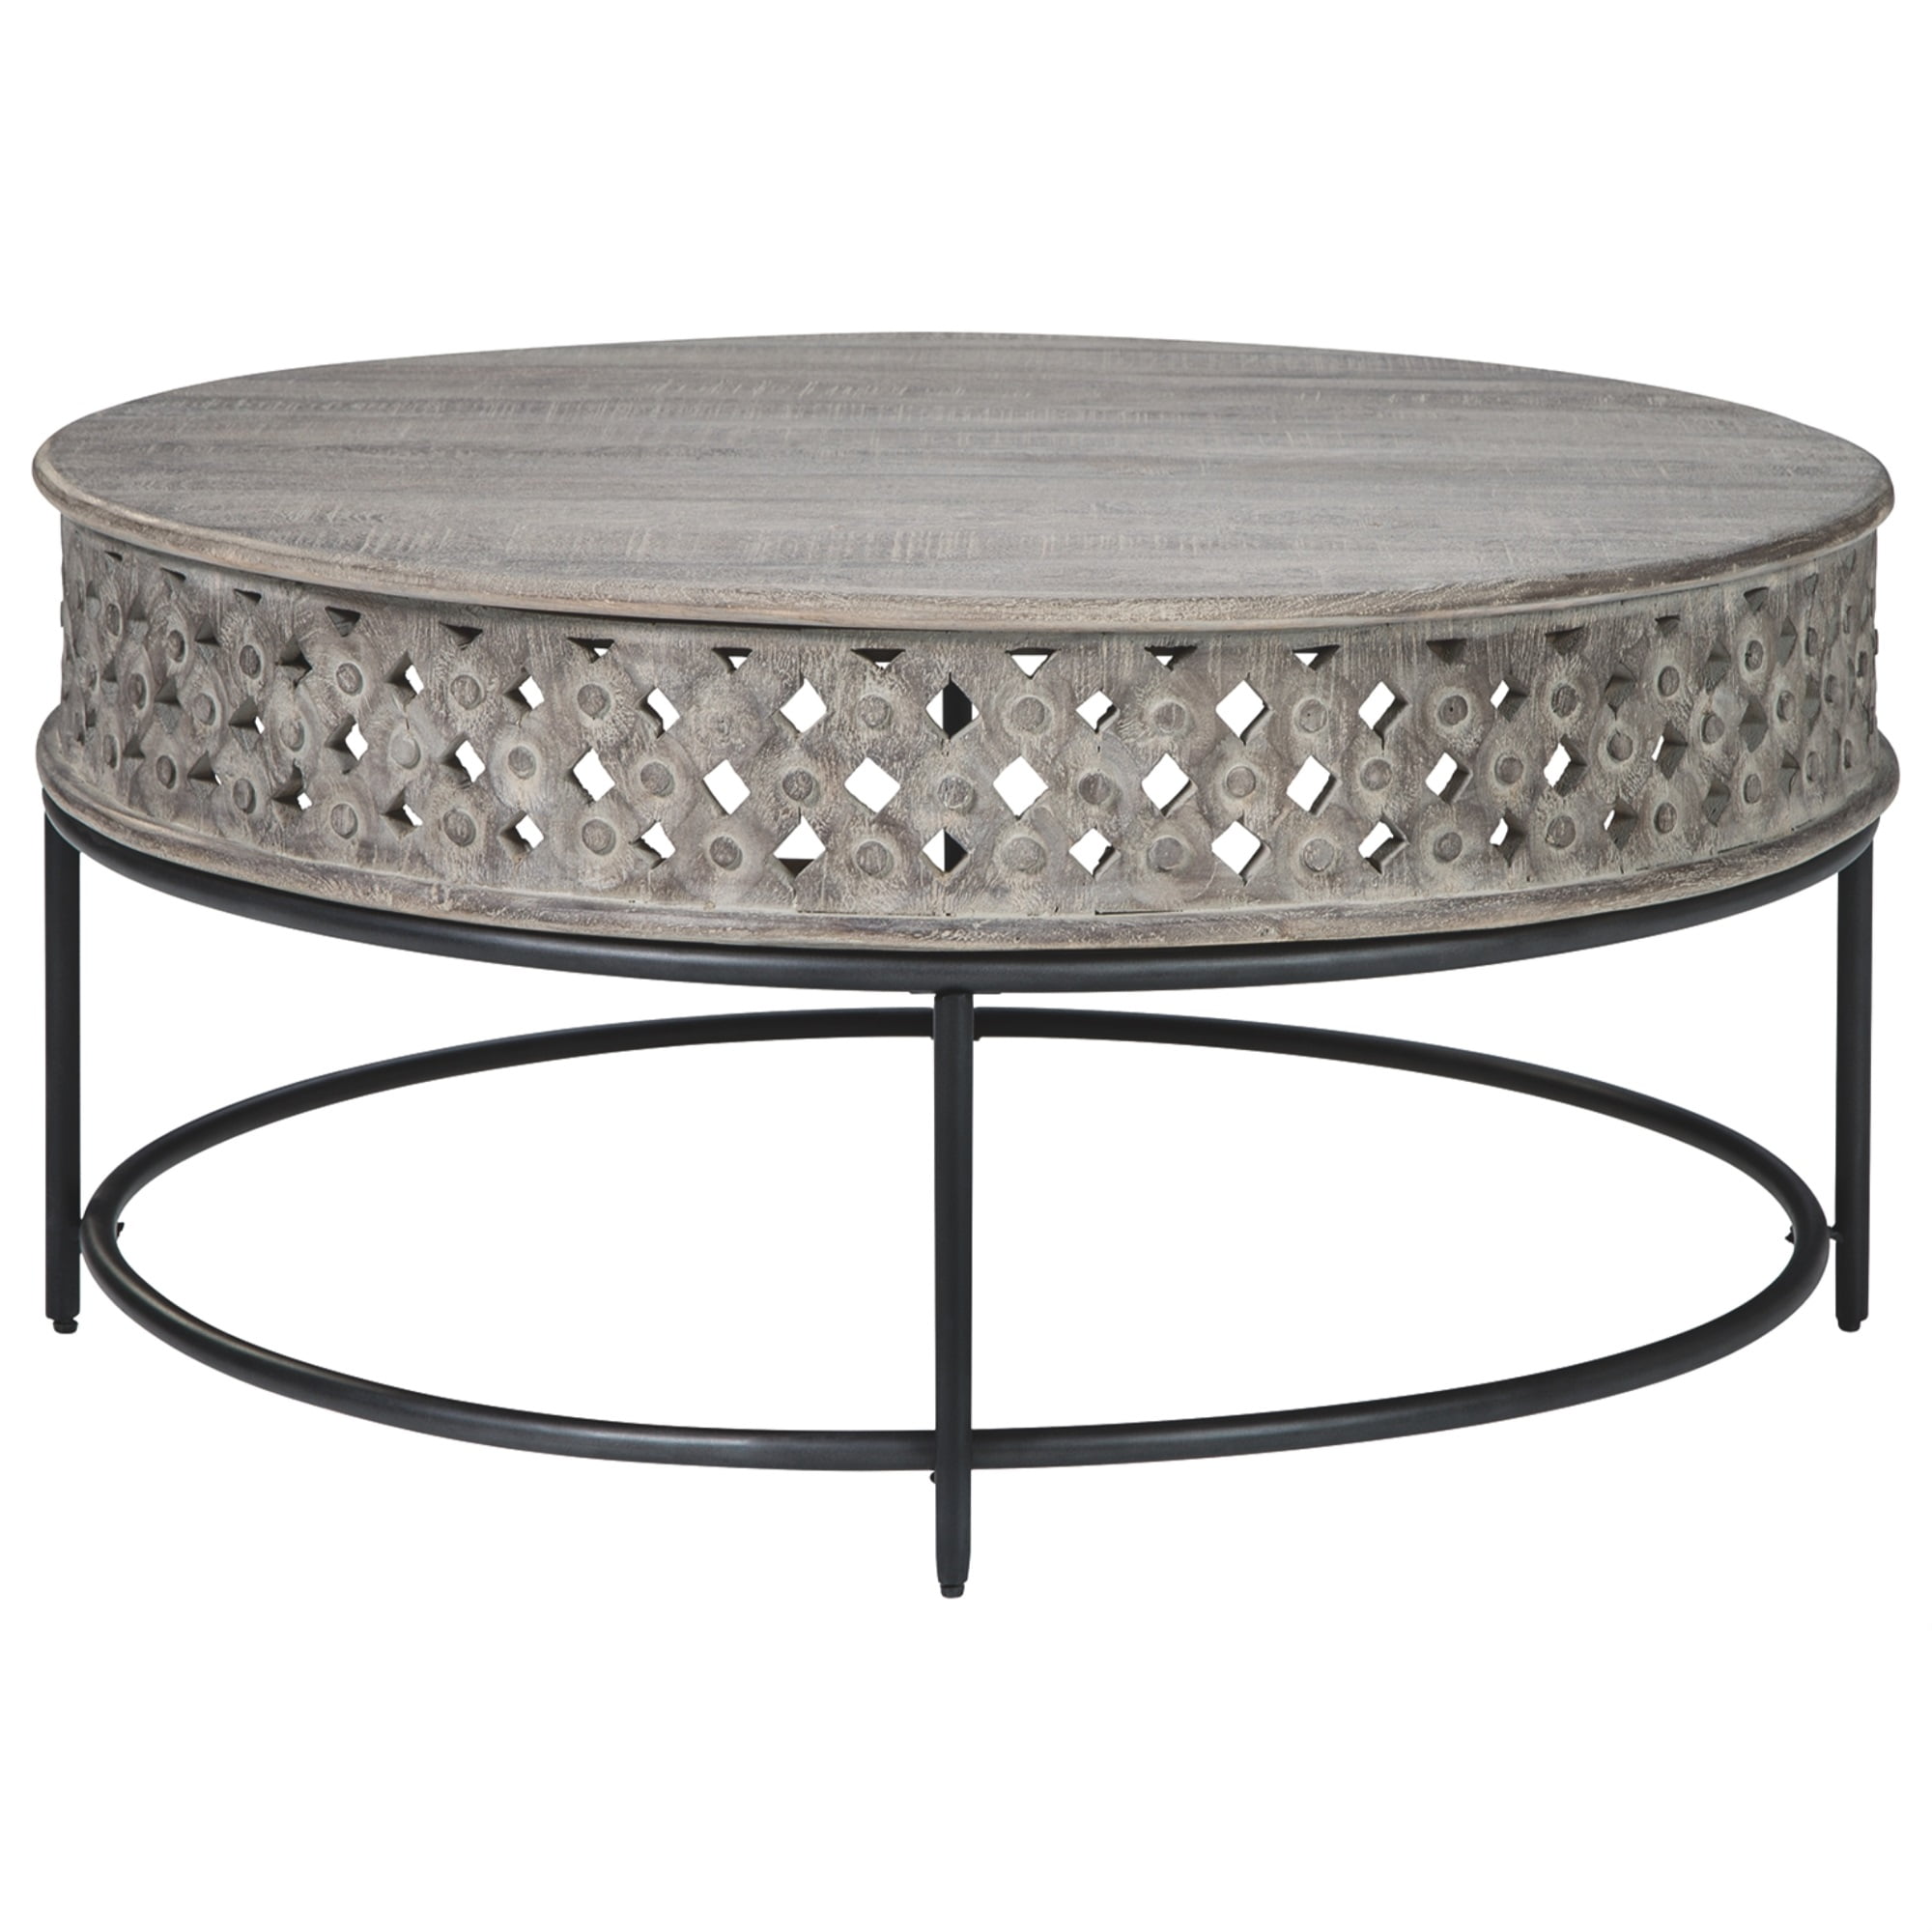 Wooden Round Cocktail Table with Hand Carved Lattice Design,Weathered